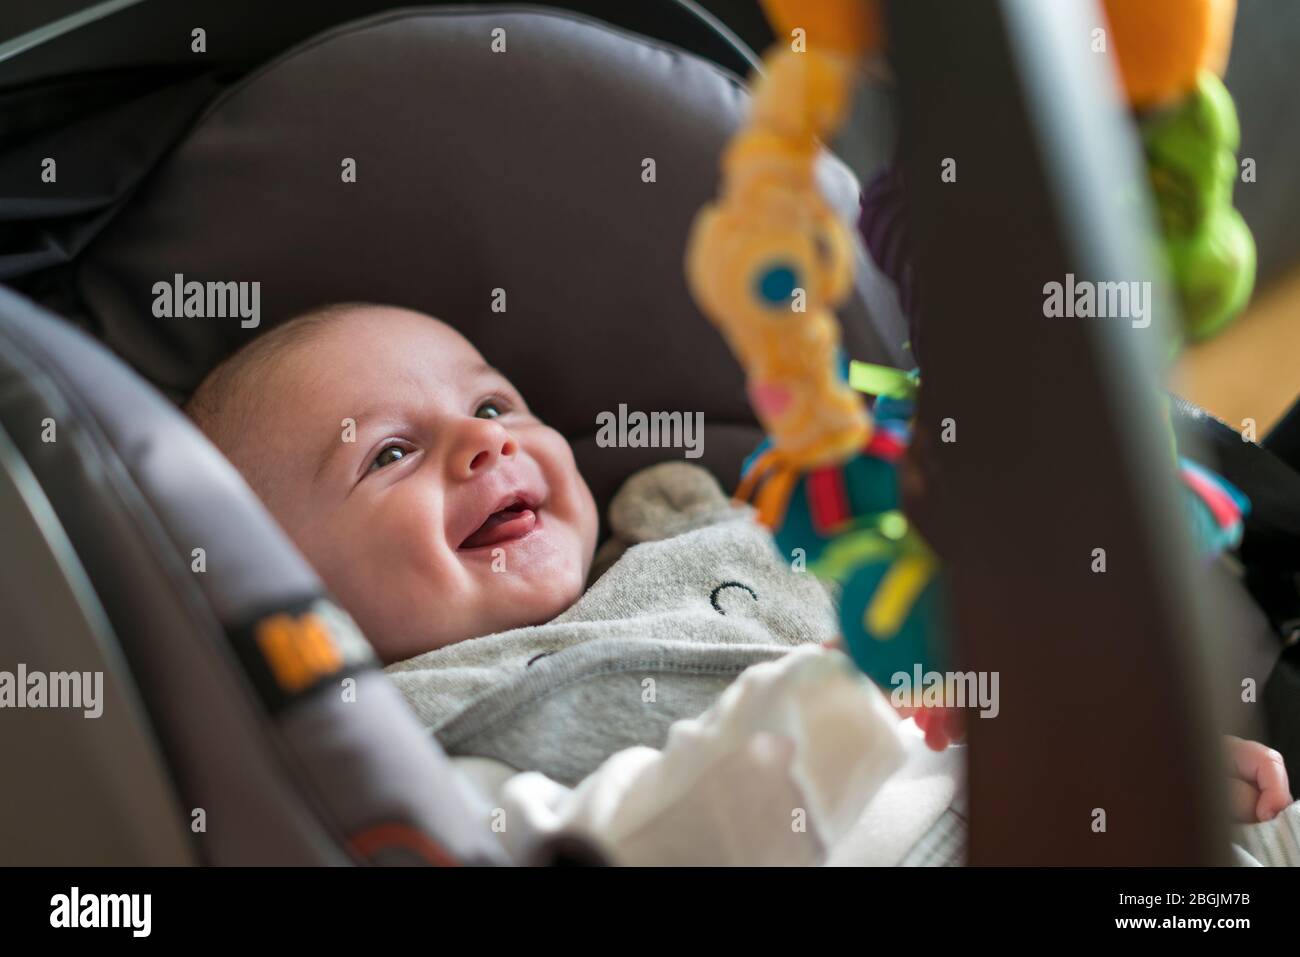 High angle view of smiling baby in car seat Stock Photo